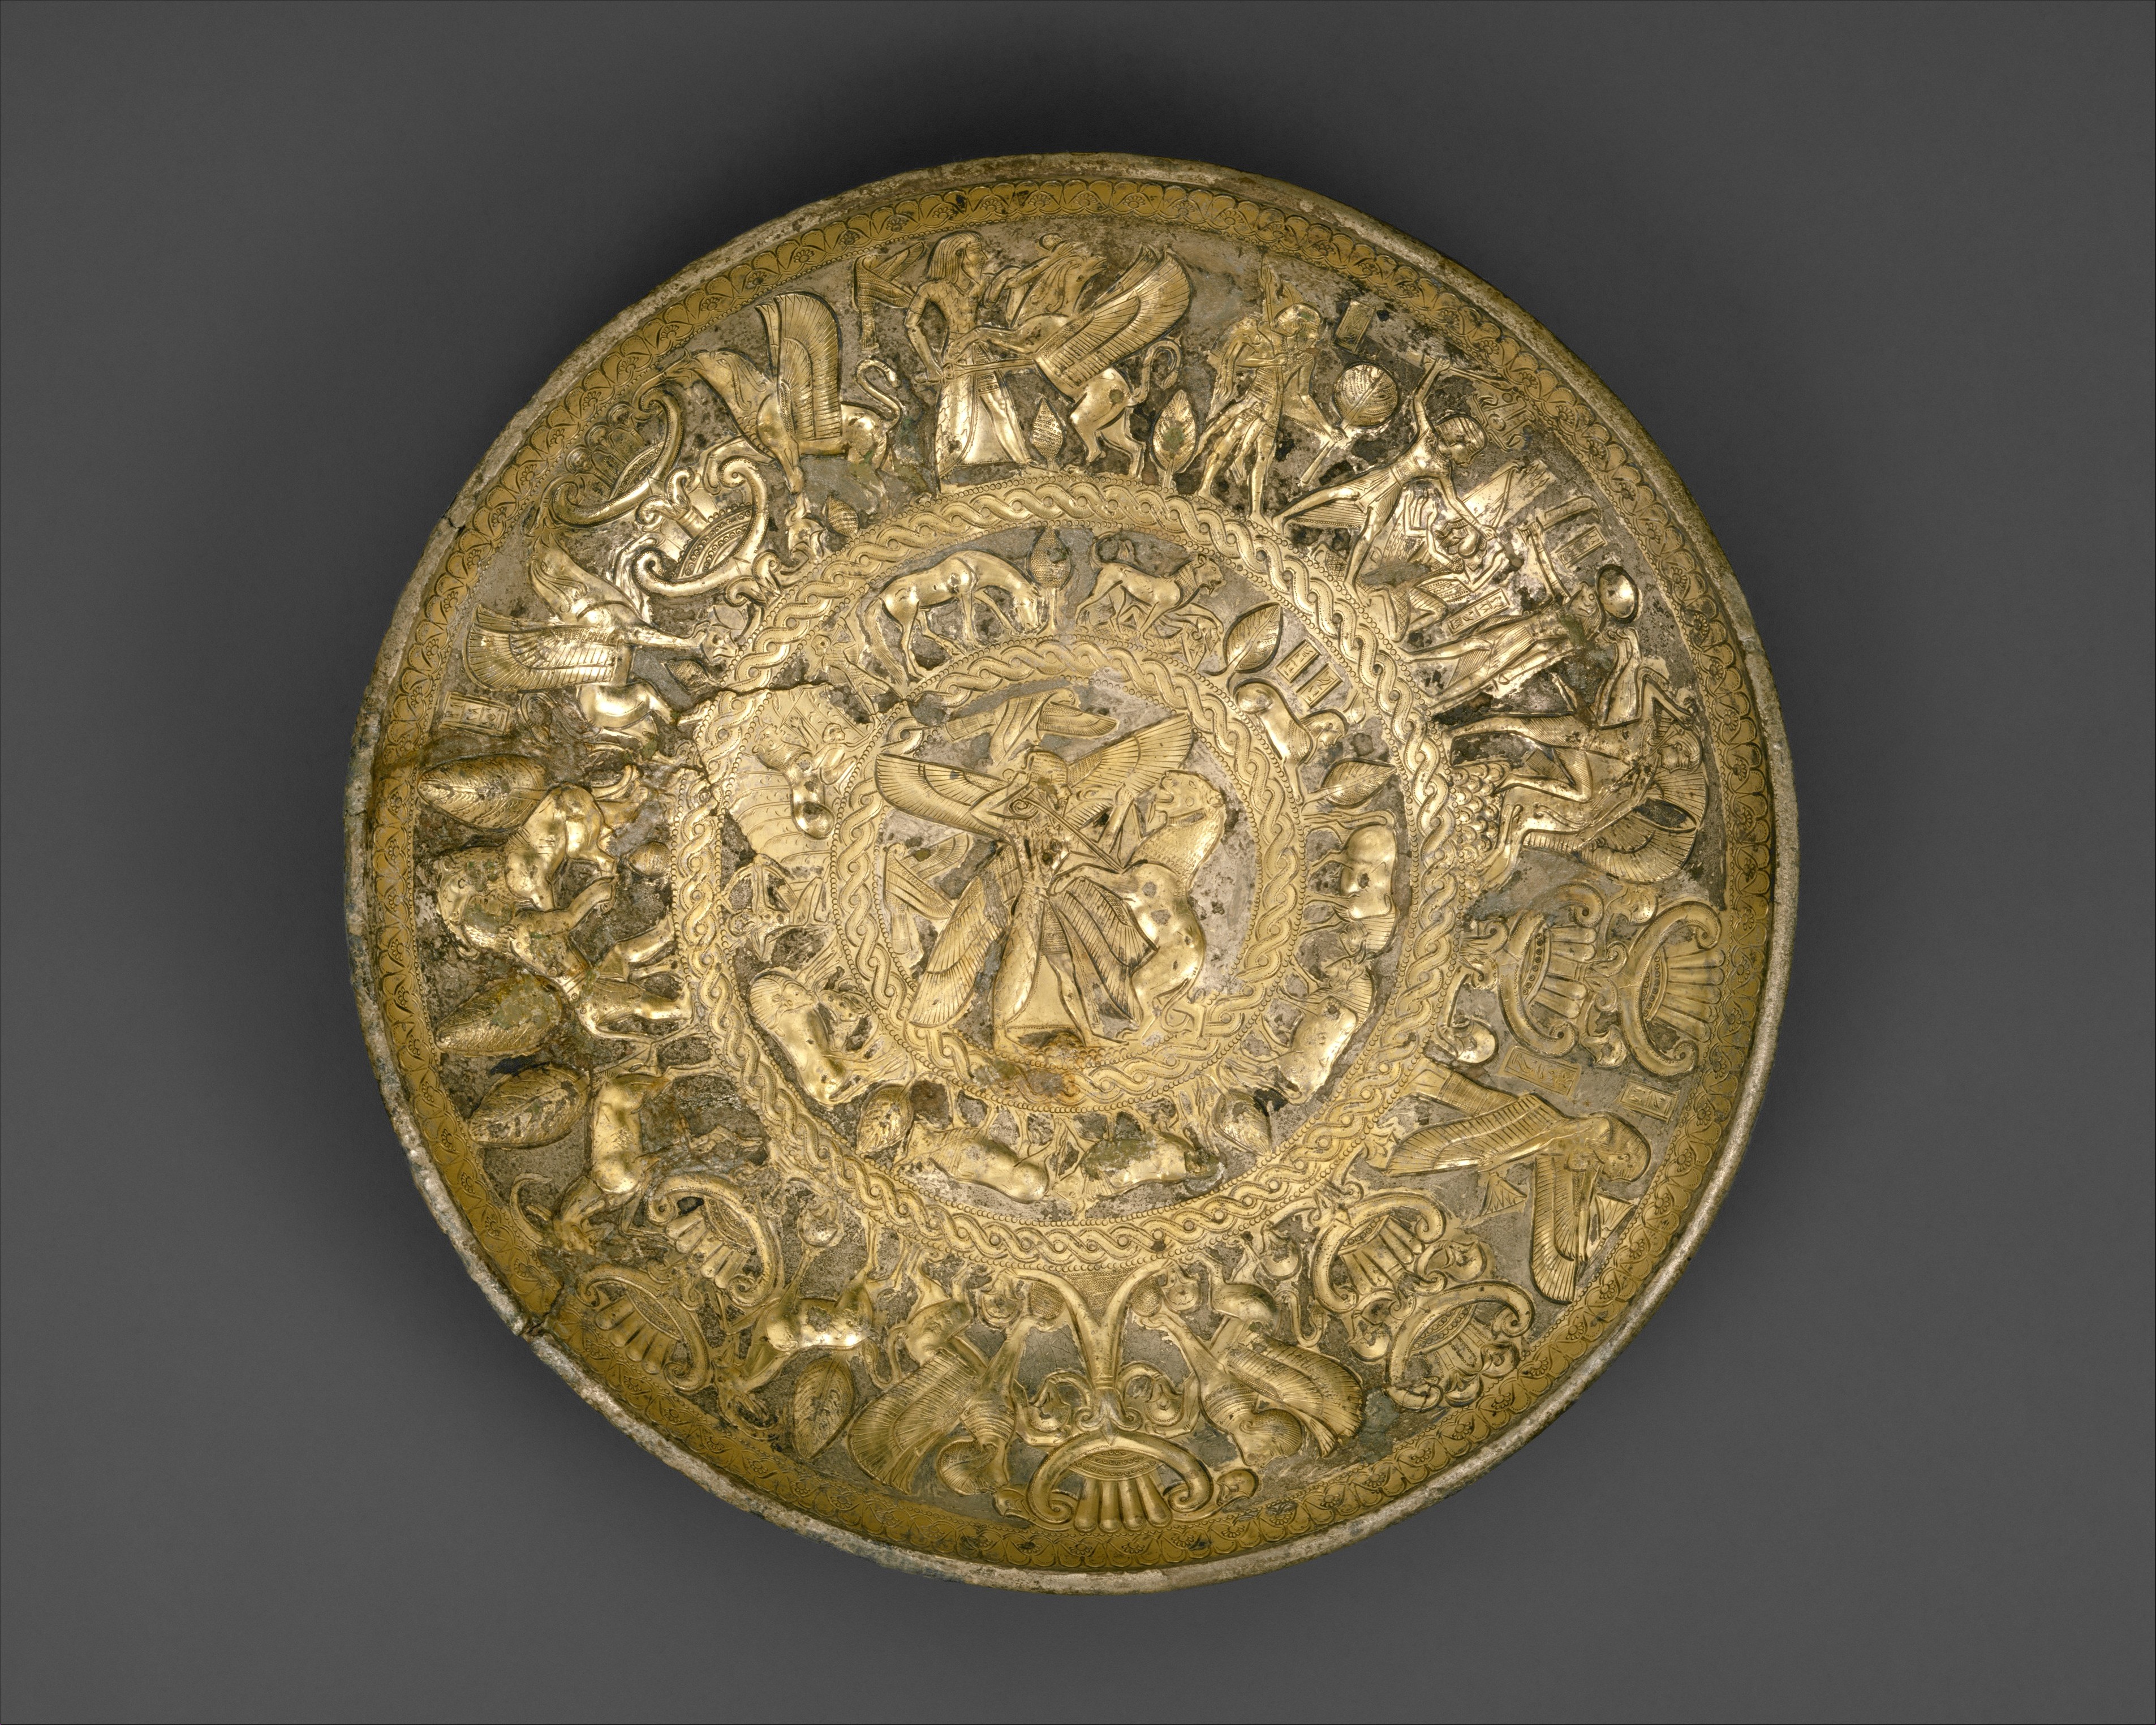 Silver-gilt bowl from ancient Cyprus depicting influences from Egypt, Assyria, and Phoenicia, ca. 725–675 BCE.jpg